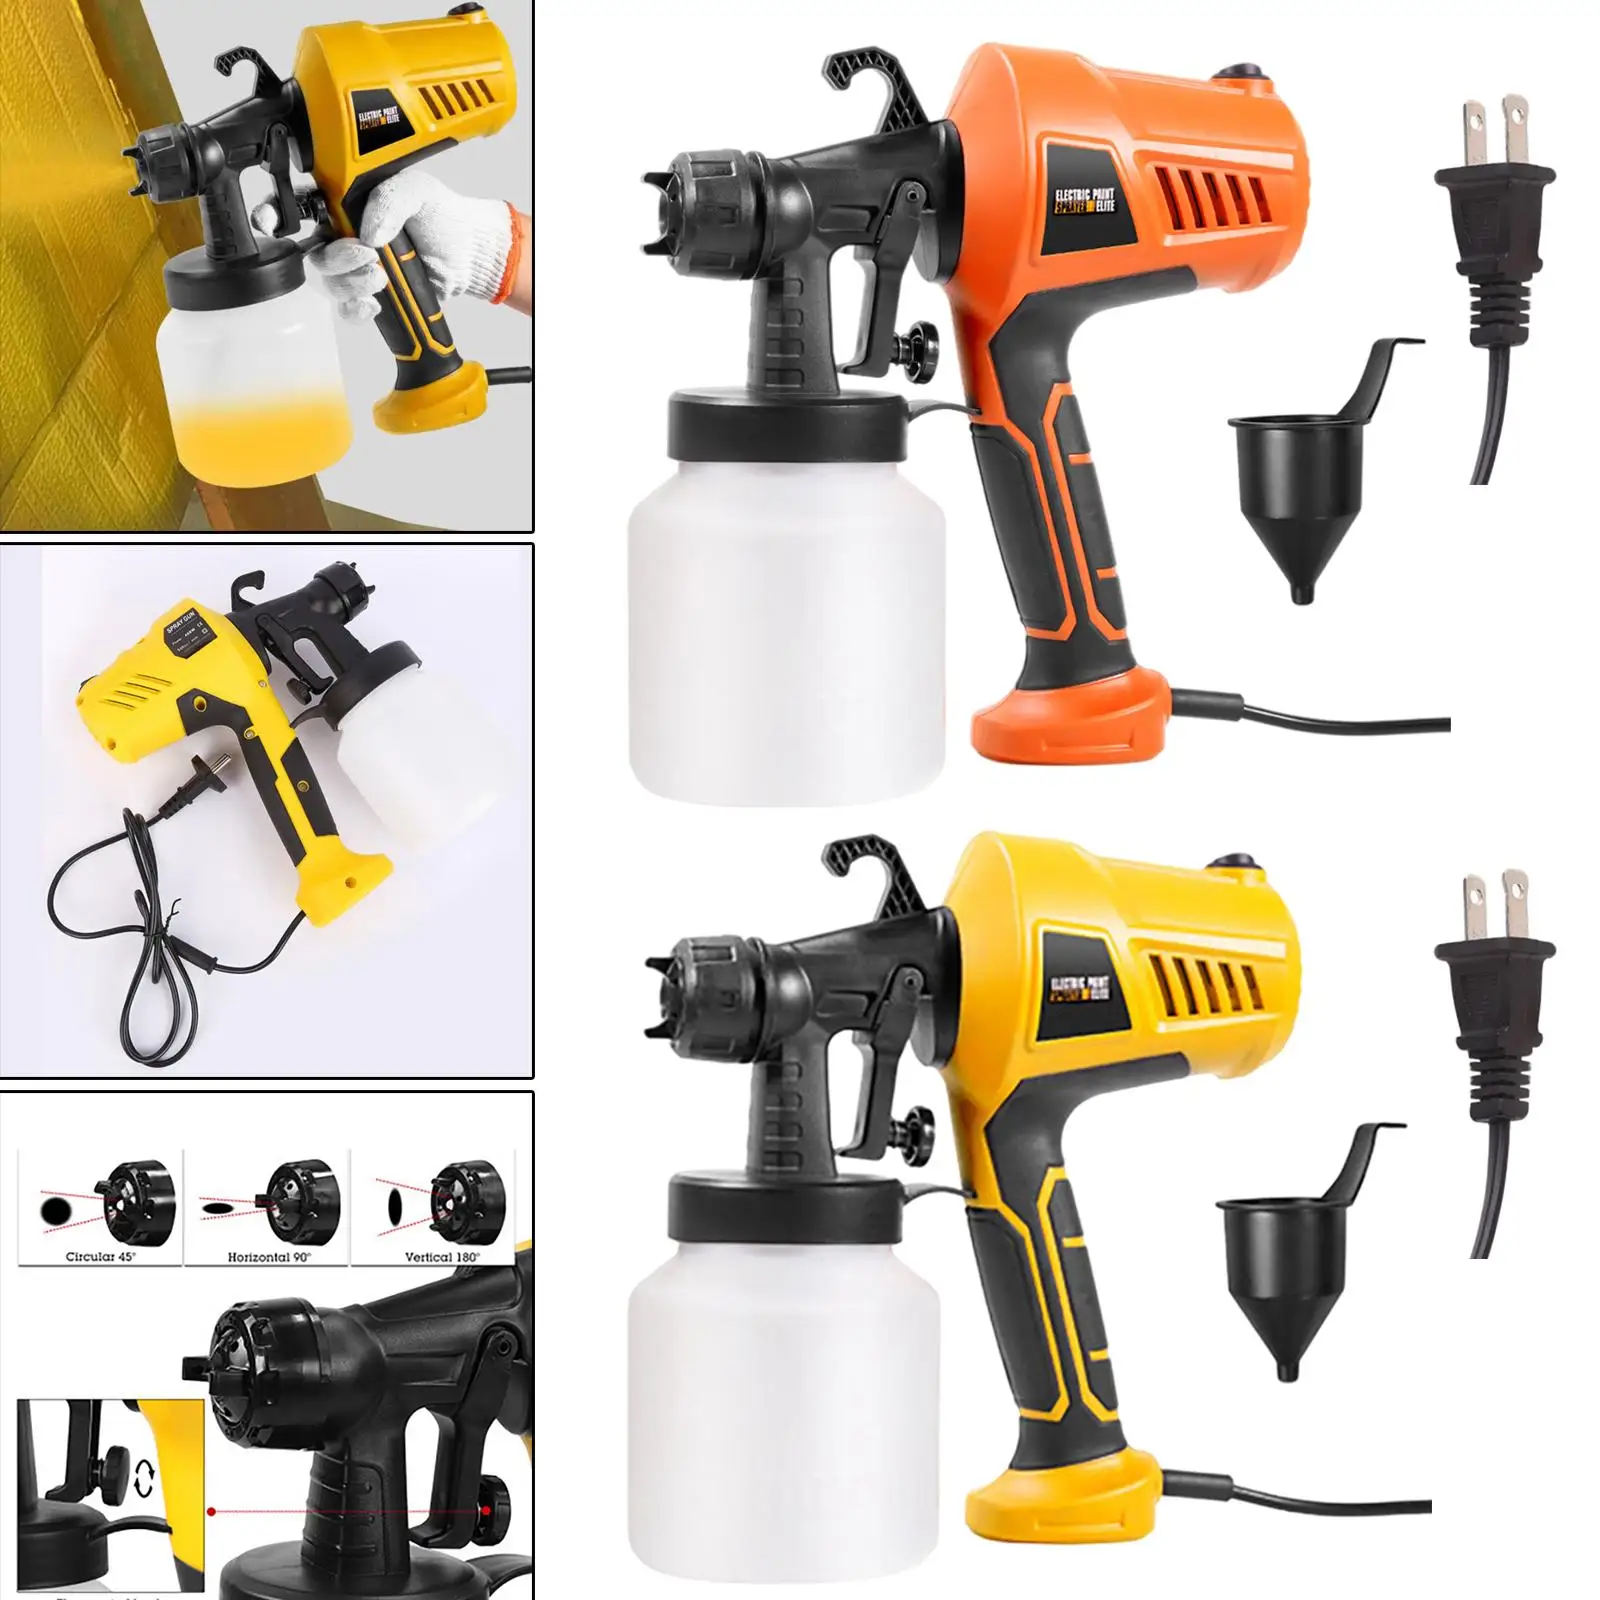 Handheld Paint Sprayer 800ml High Power Electric Spray with 3 Pattern for Painting Ceiling Fence Cabinets Easy to Clean 400W